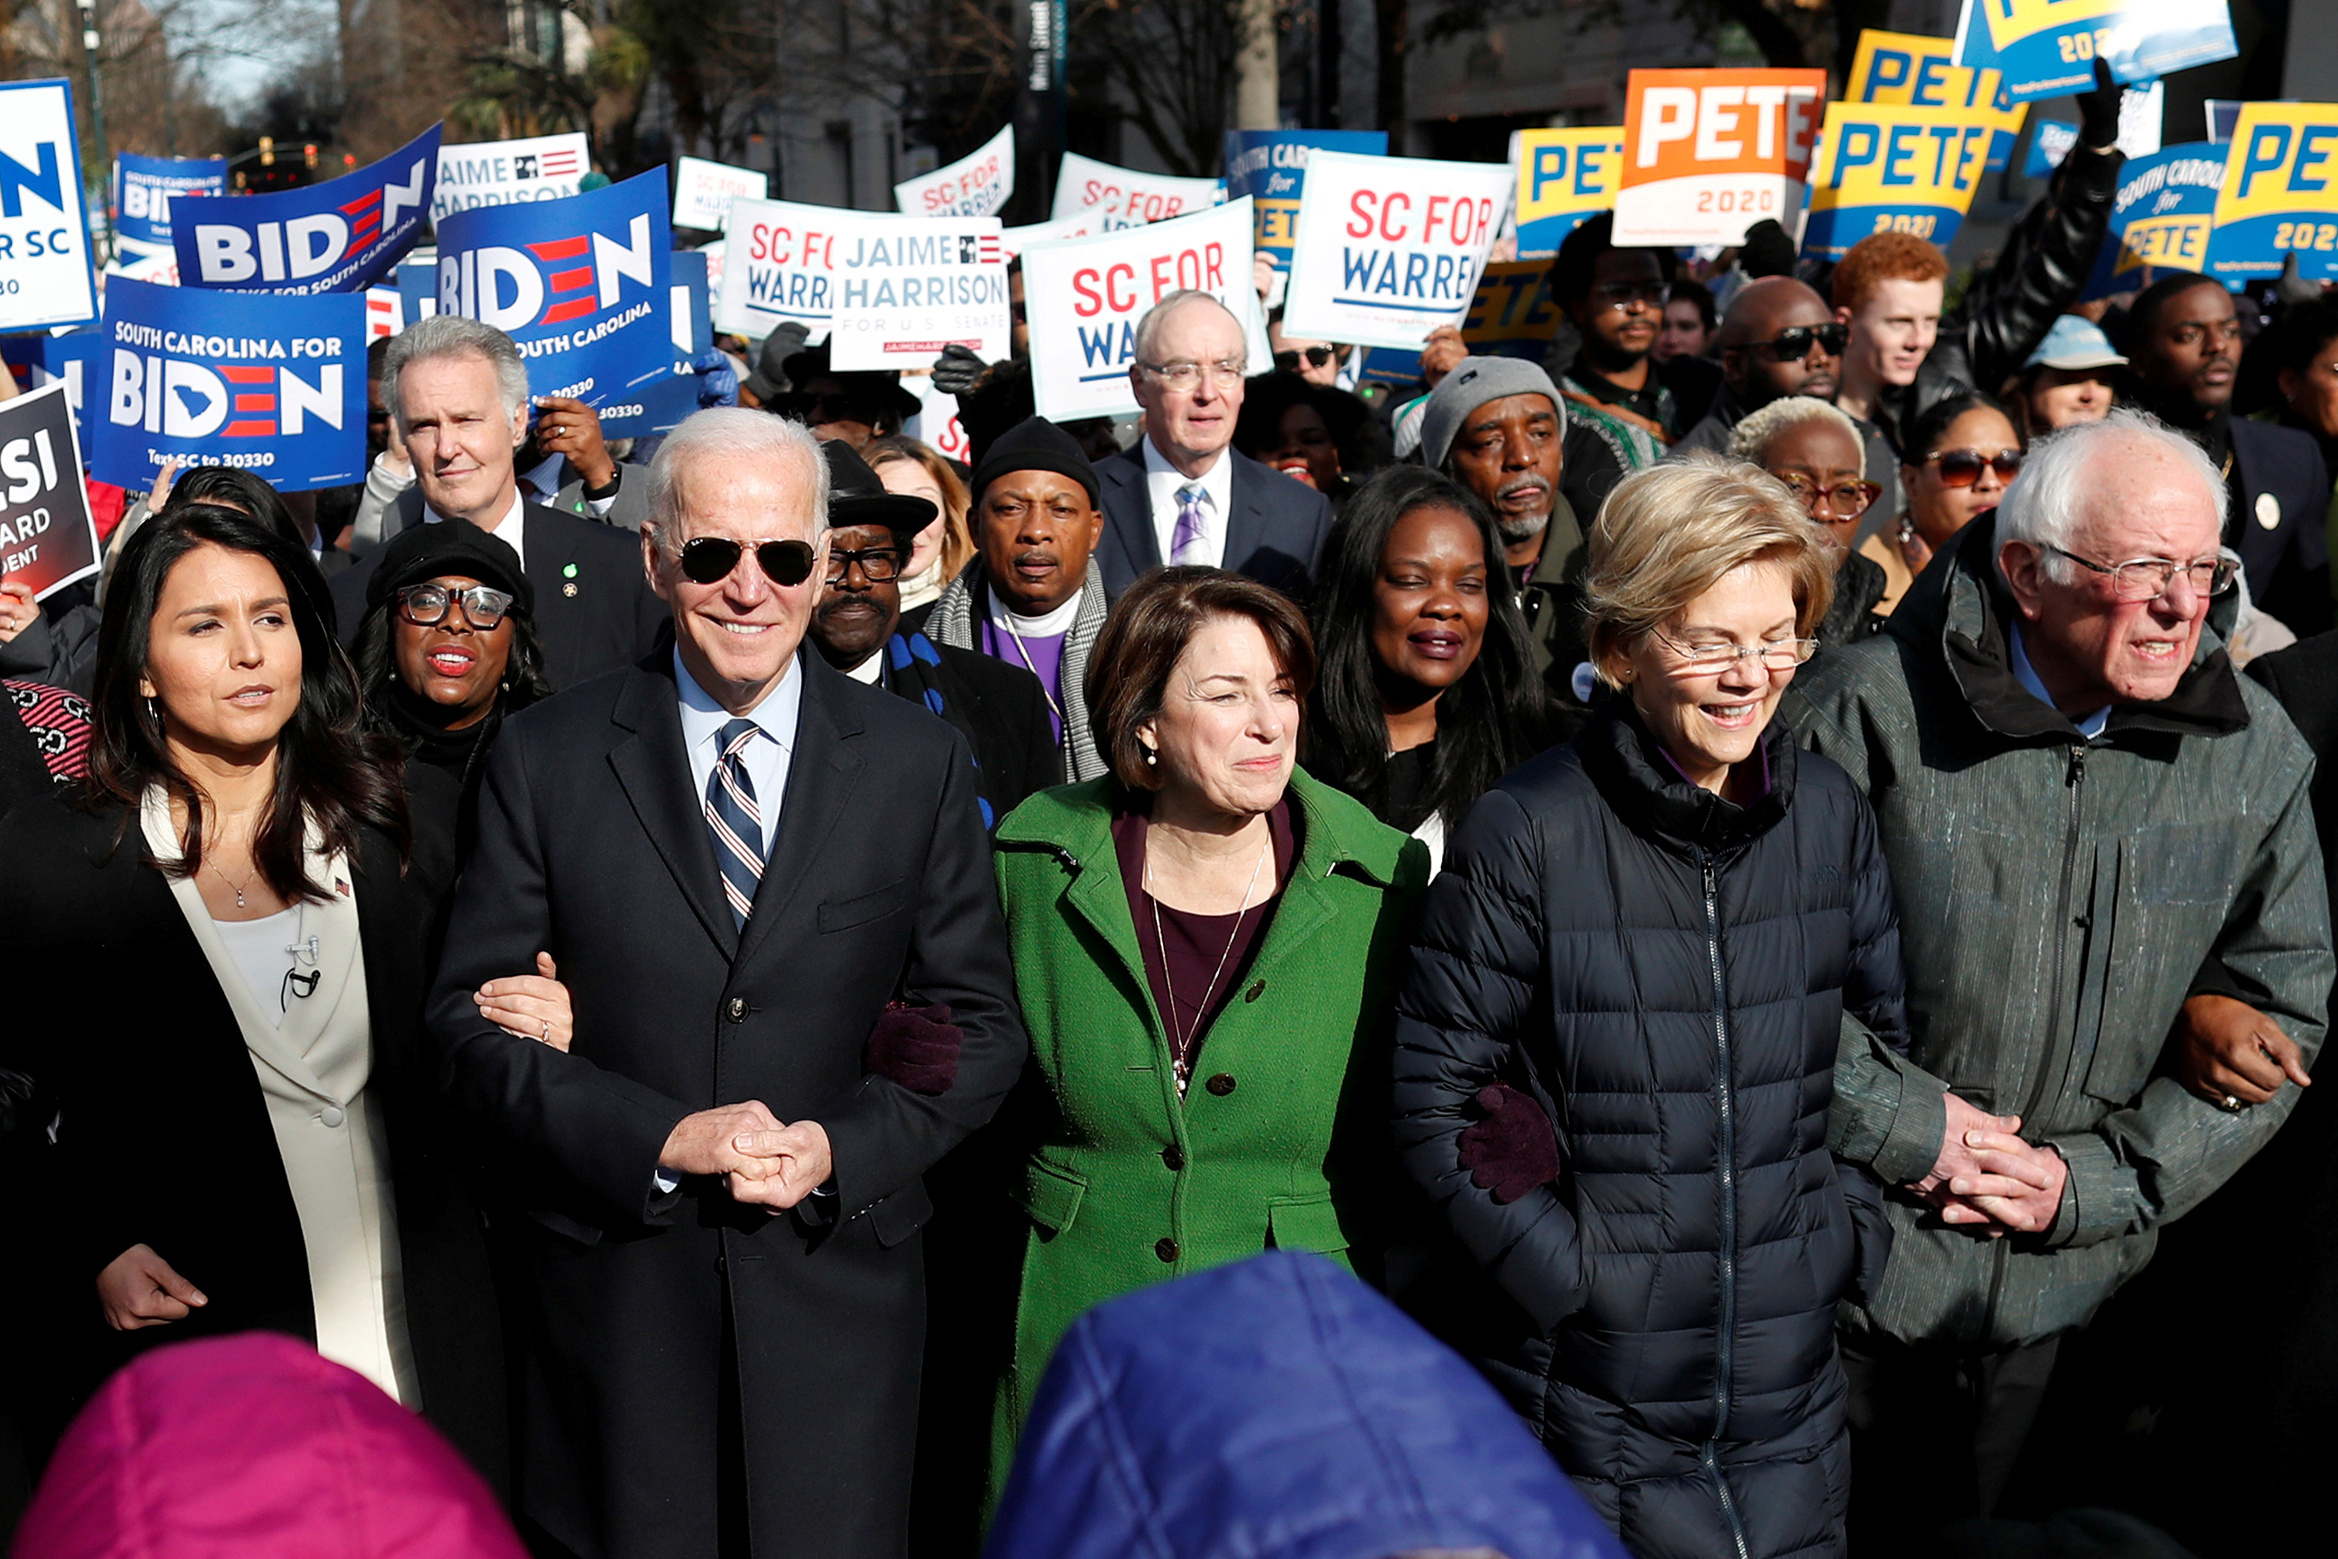 PHOTO: 2020 presidential candidates walk arm-in-arm with local African-American leaders during the Martin Luther King Jr. Day Parade in Columbia, South Carolina, Jan. 20, 2020.